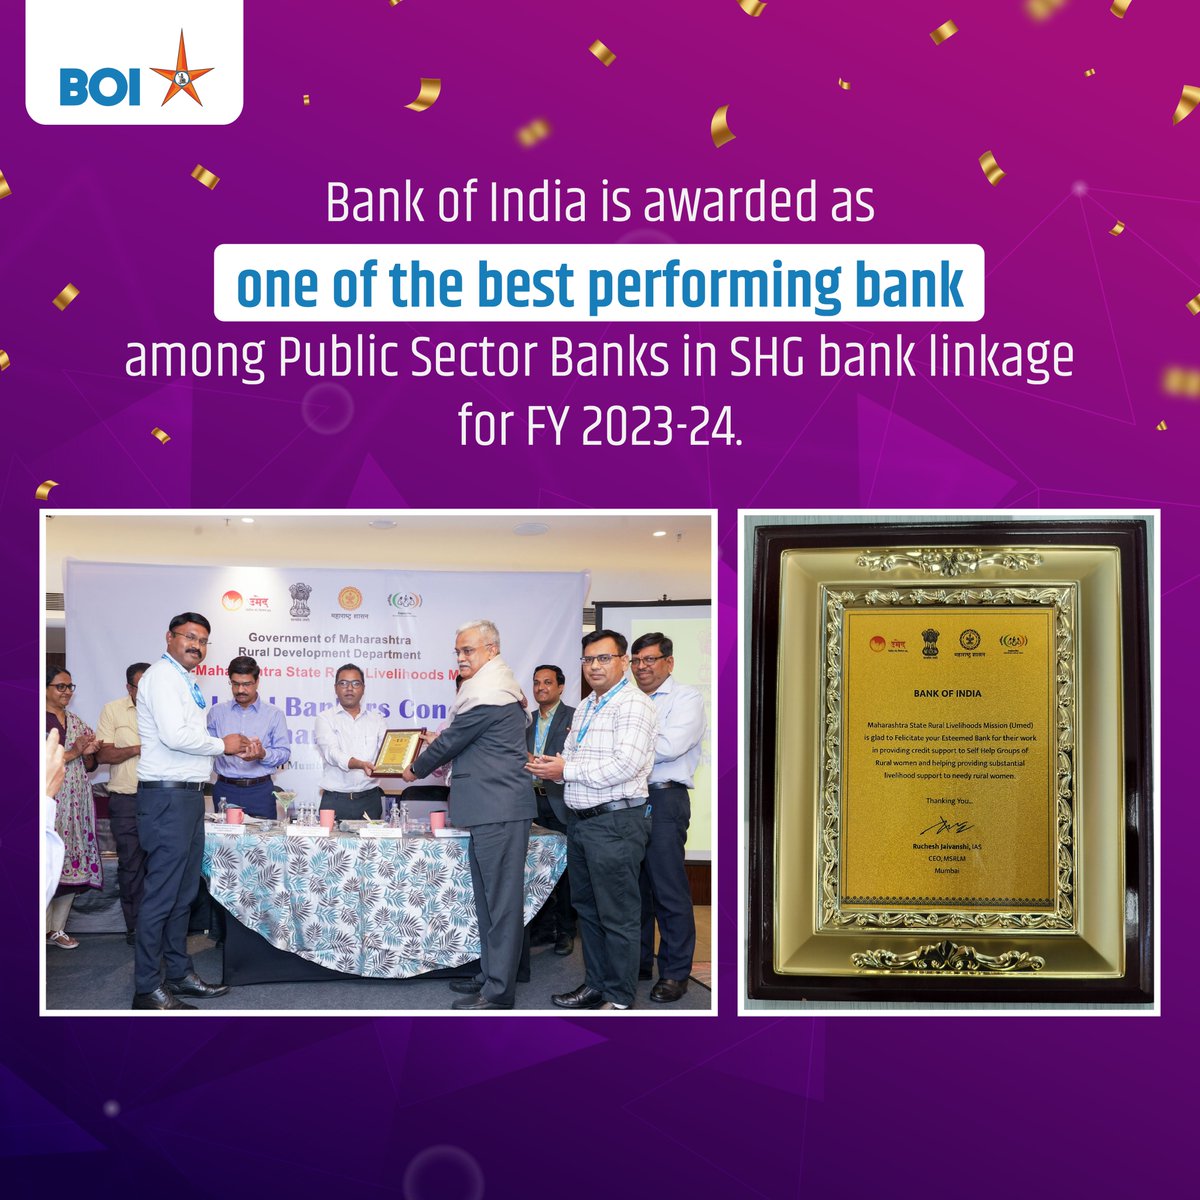 Thrilled to share that Bank of India has been awarded as one of the best-performing bank for Outstanding performance in SHG Bank Linkage during FY 2023-2024 by MSRLM! A testament to our commitment to financial inclusion and empowering communities. #BankofIndia #SHG #MSRLM